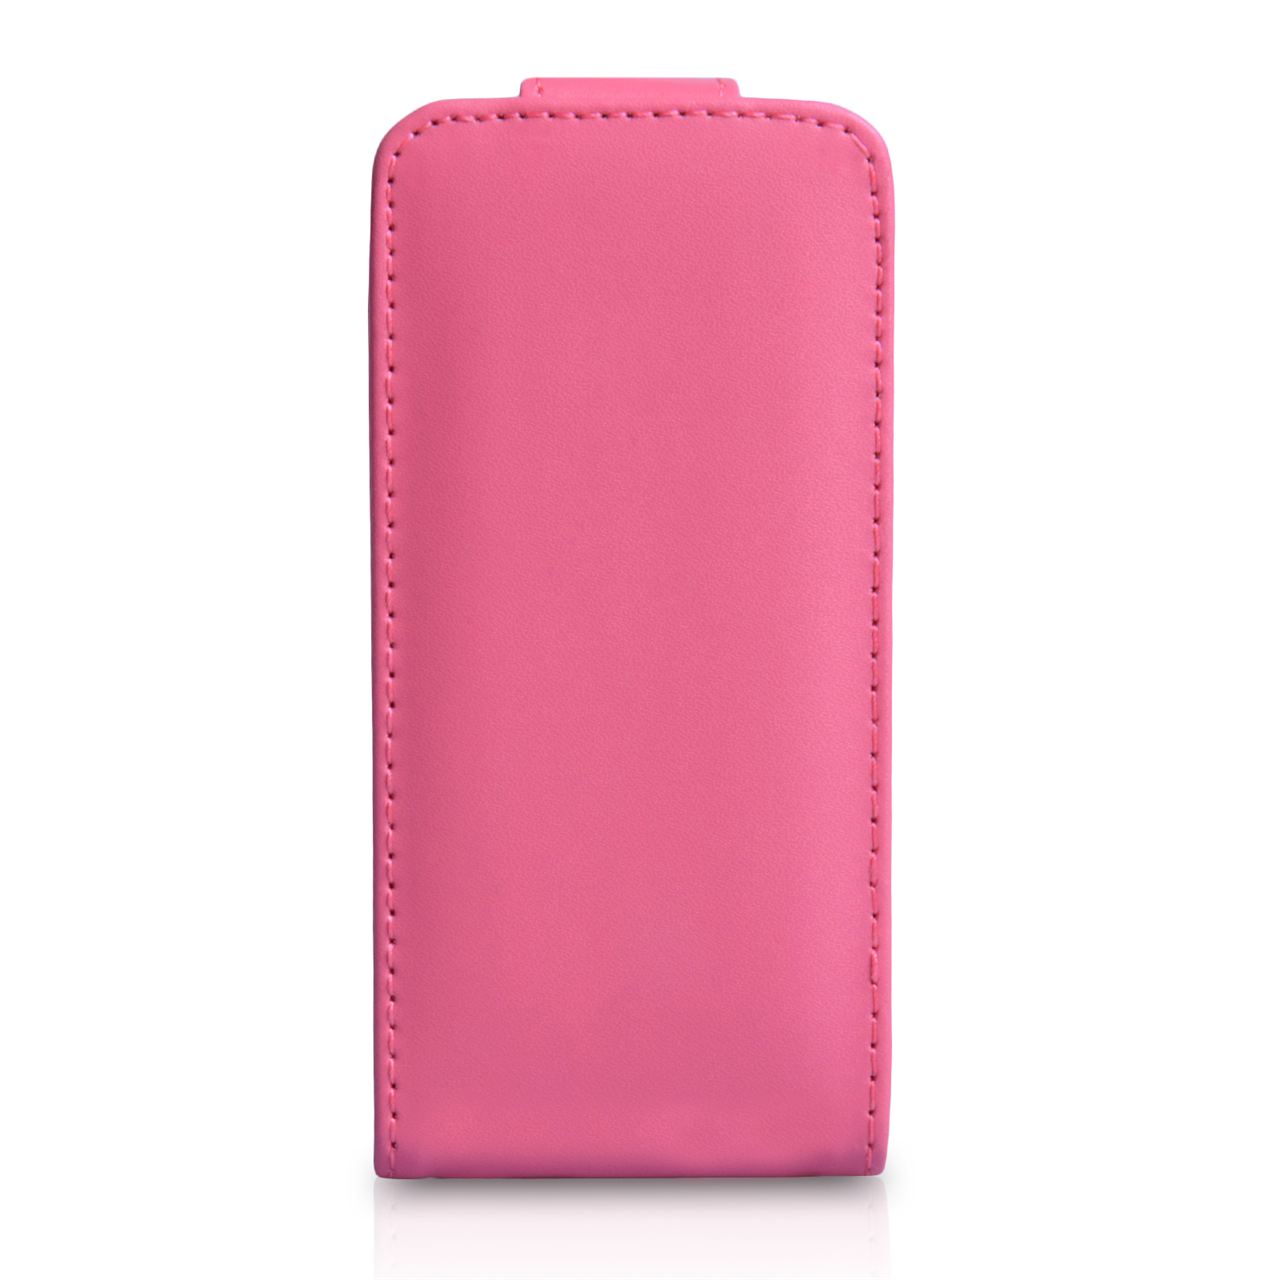 YouSave Accessories iPhone 5C Leather Effect Flip Case - Hot Pink